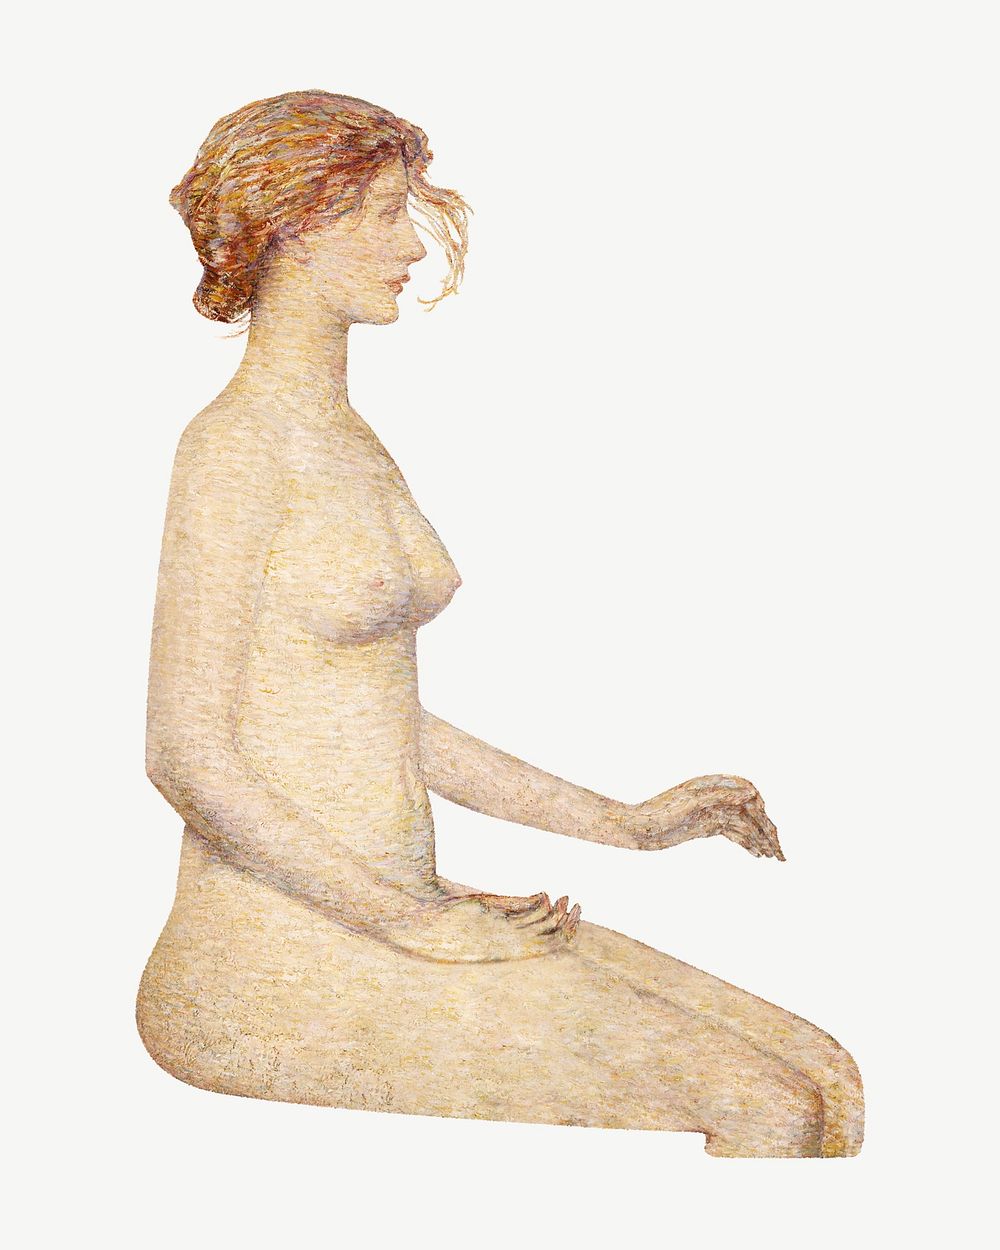 Nude woman sitting, vintage illustration psd by Frederick Childe Hassam. Remixed by rawpixel.